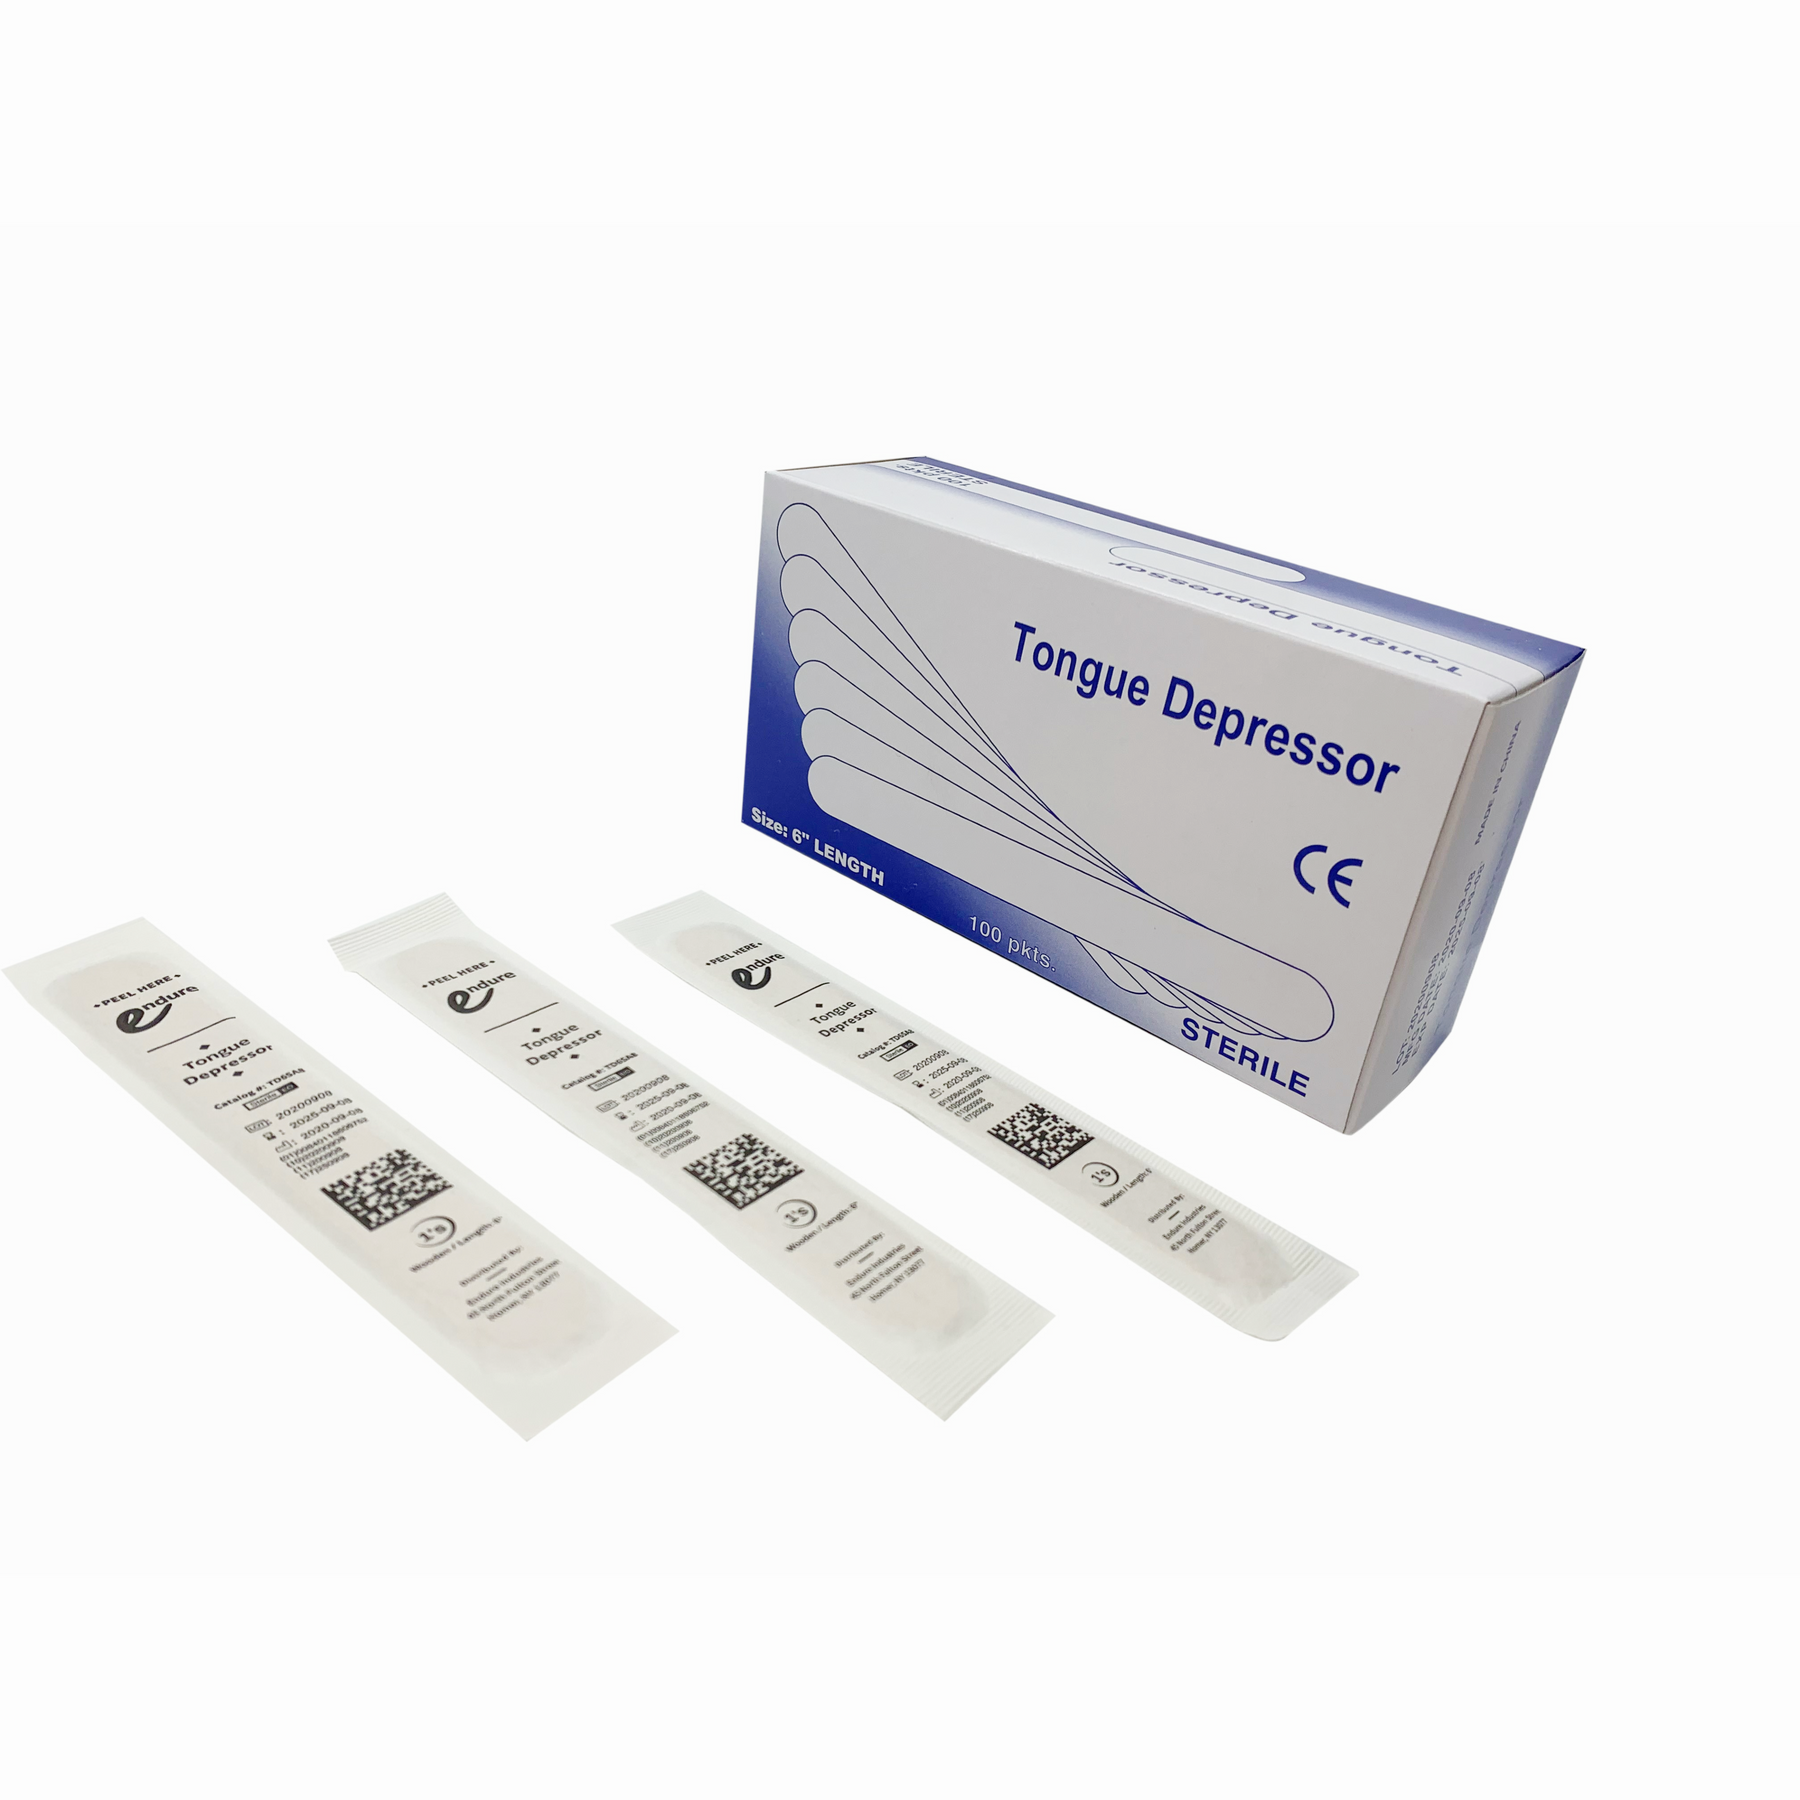 Buy Prime Sterile Wooden Tongue Depressor 100'S in Qatar Orders delivered  quickly - Wellcare Pharmacy